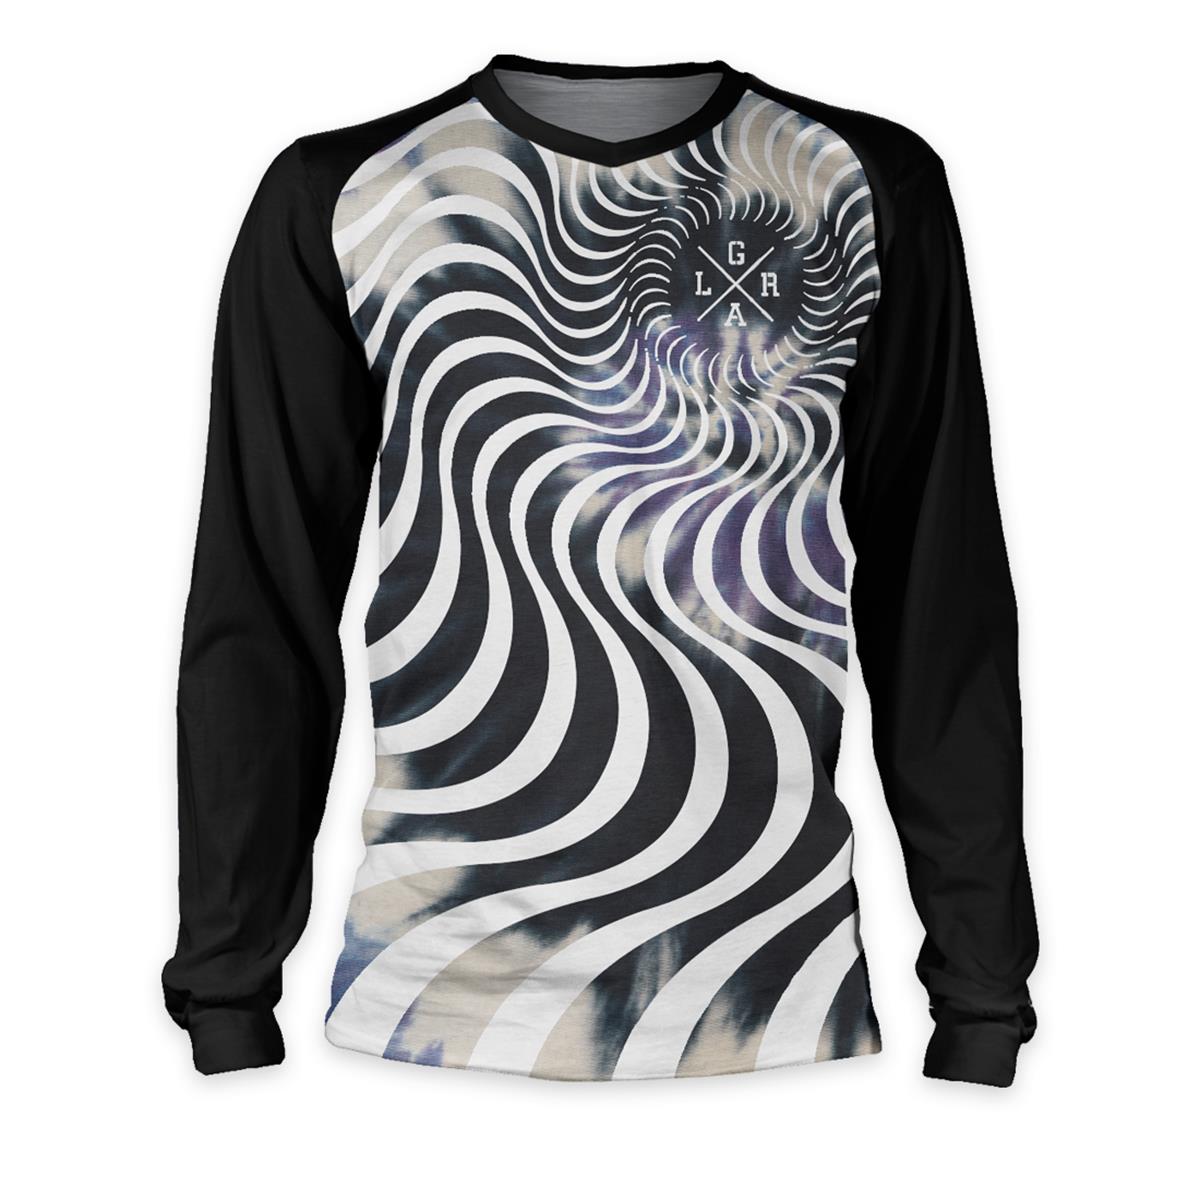 Loose Riders Downhill Jersey Long Sleeve Cult of Shred Acid Cult Bleach - Black/White